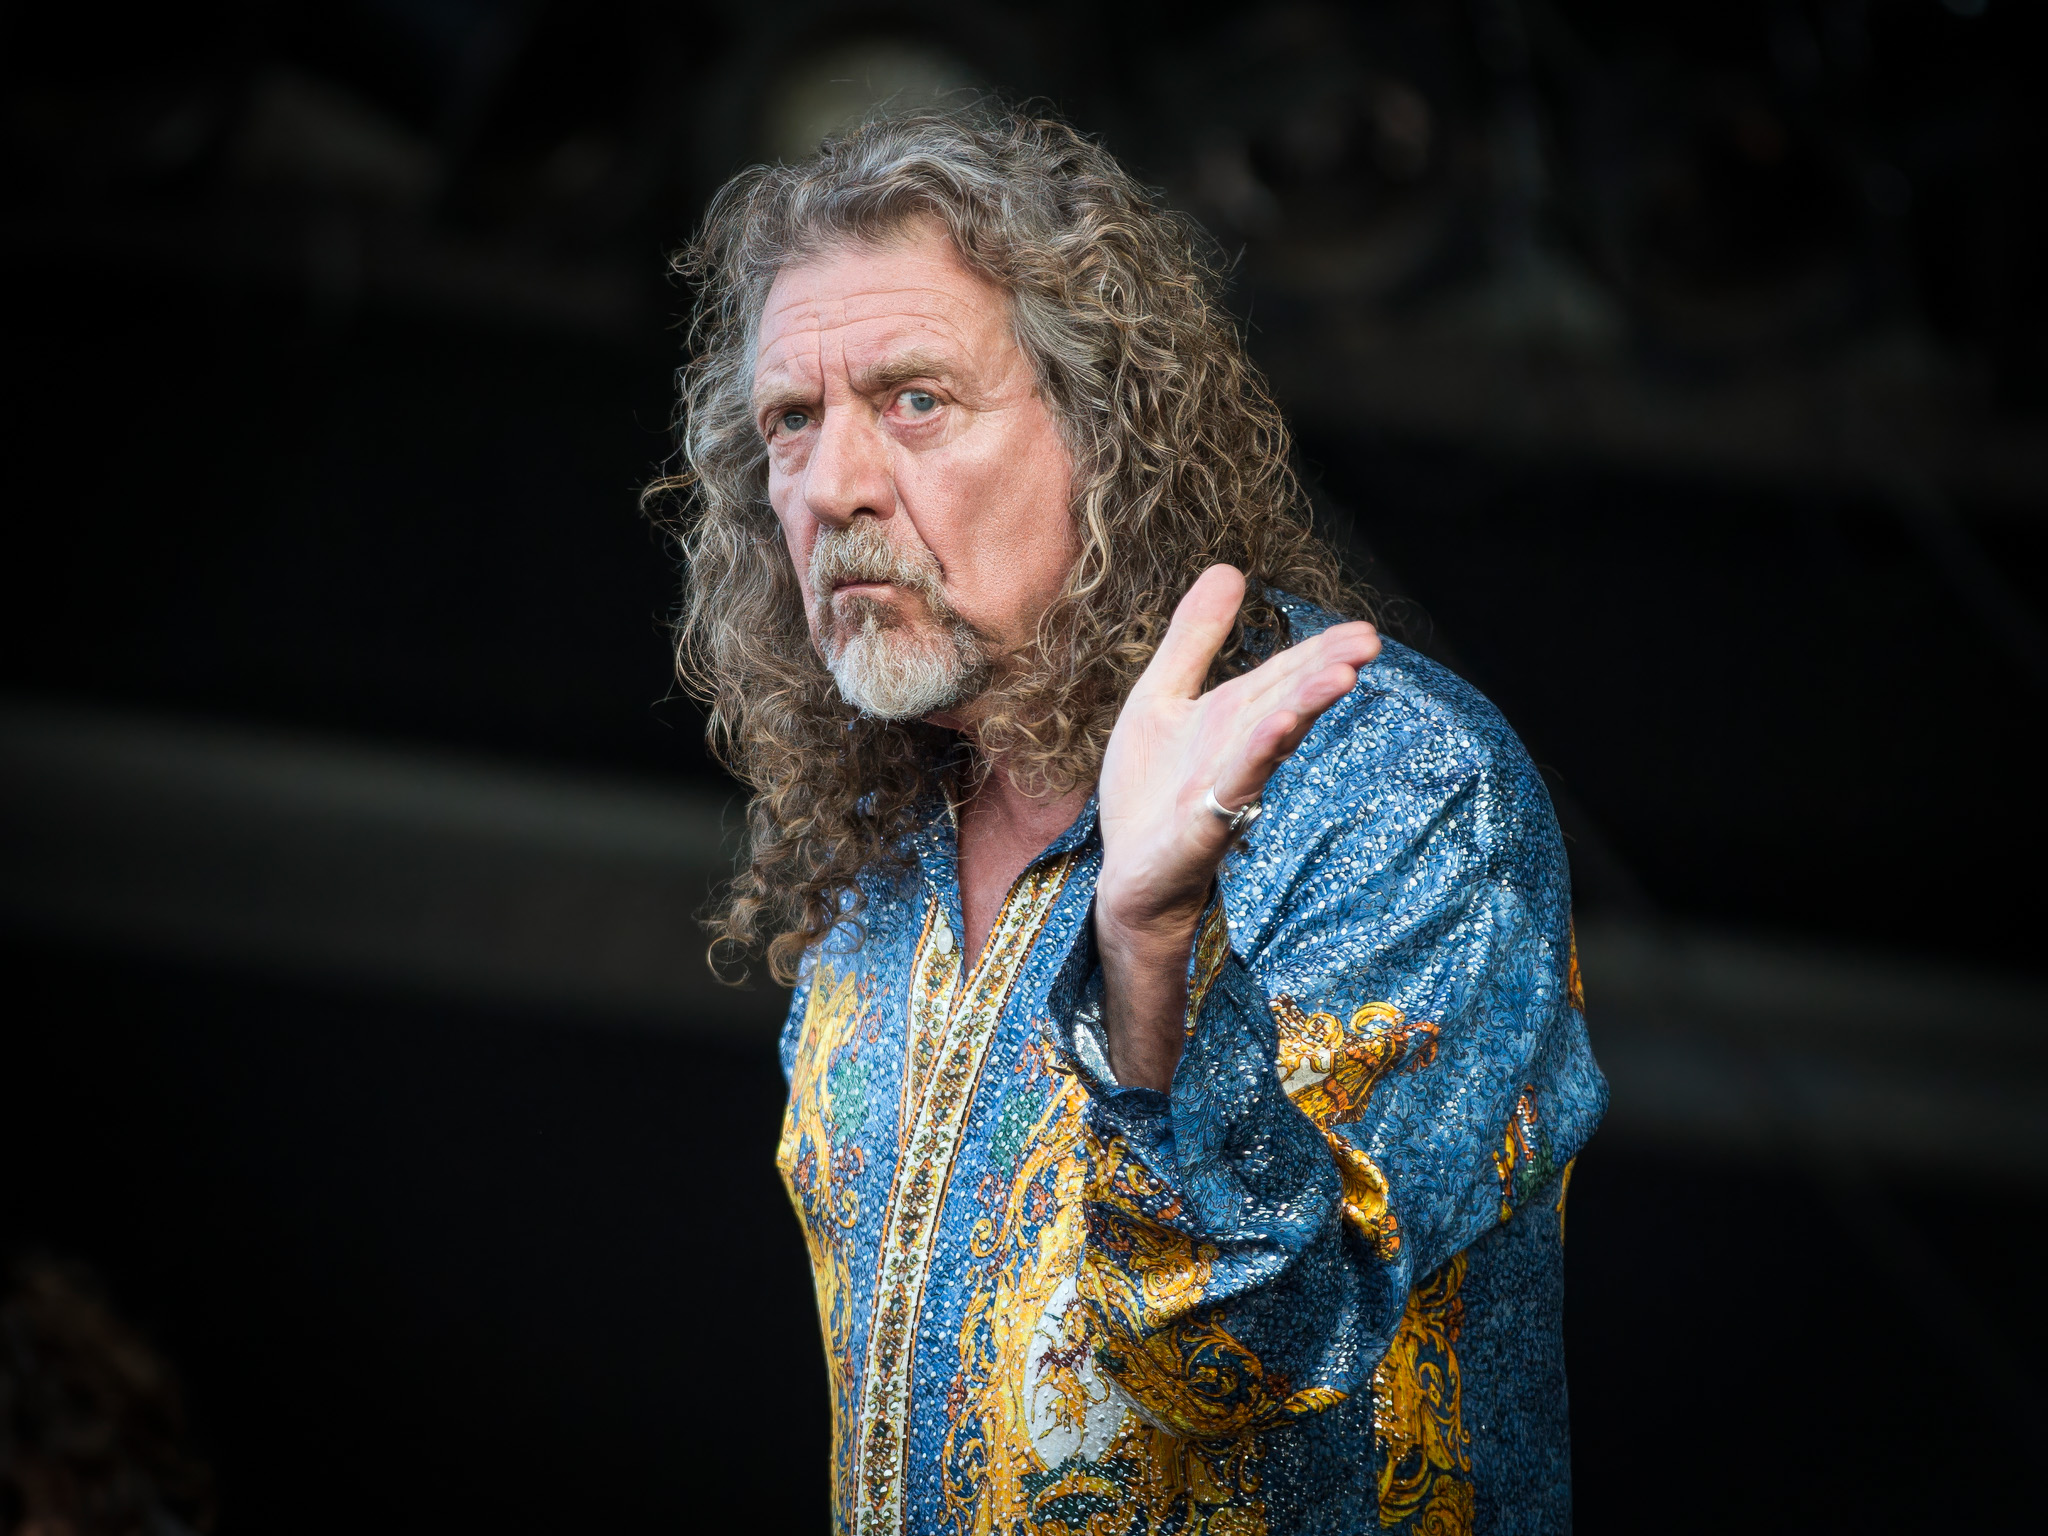 Robert Plant by Bullet-ray Photography